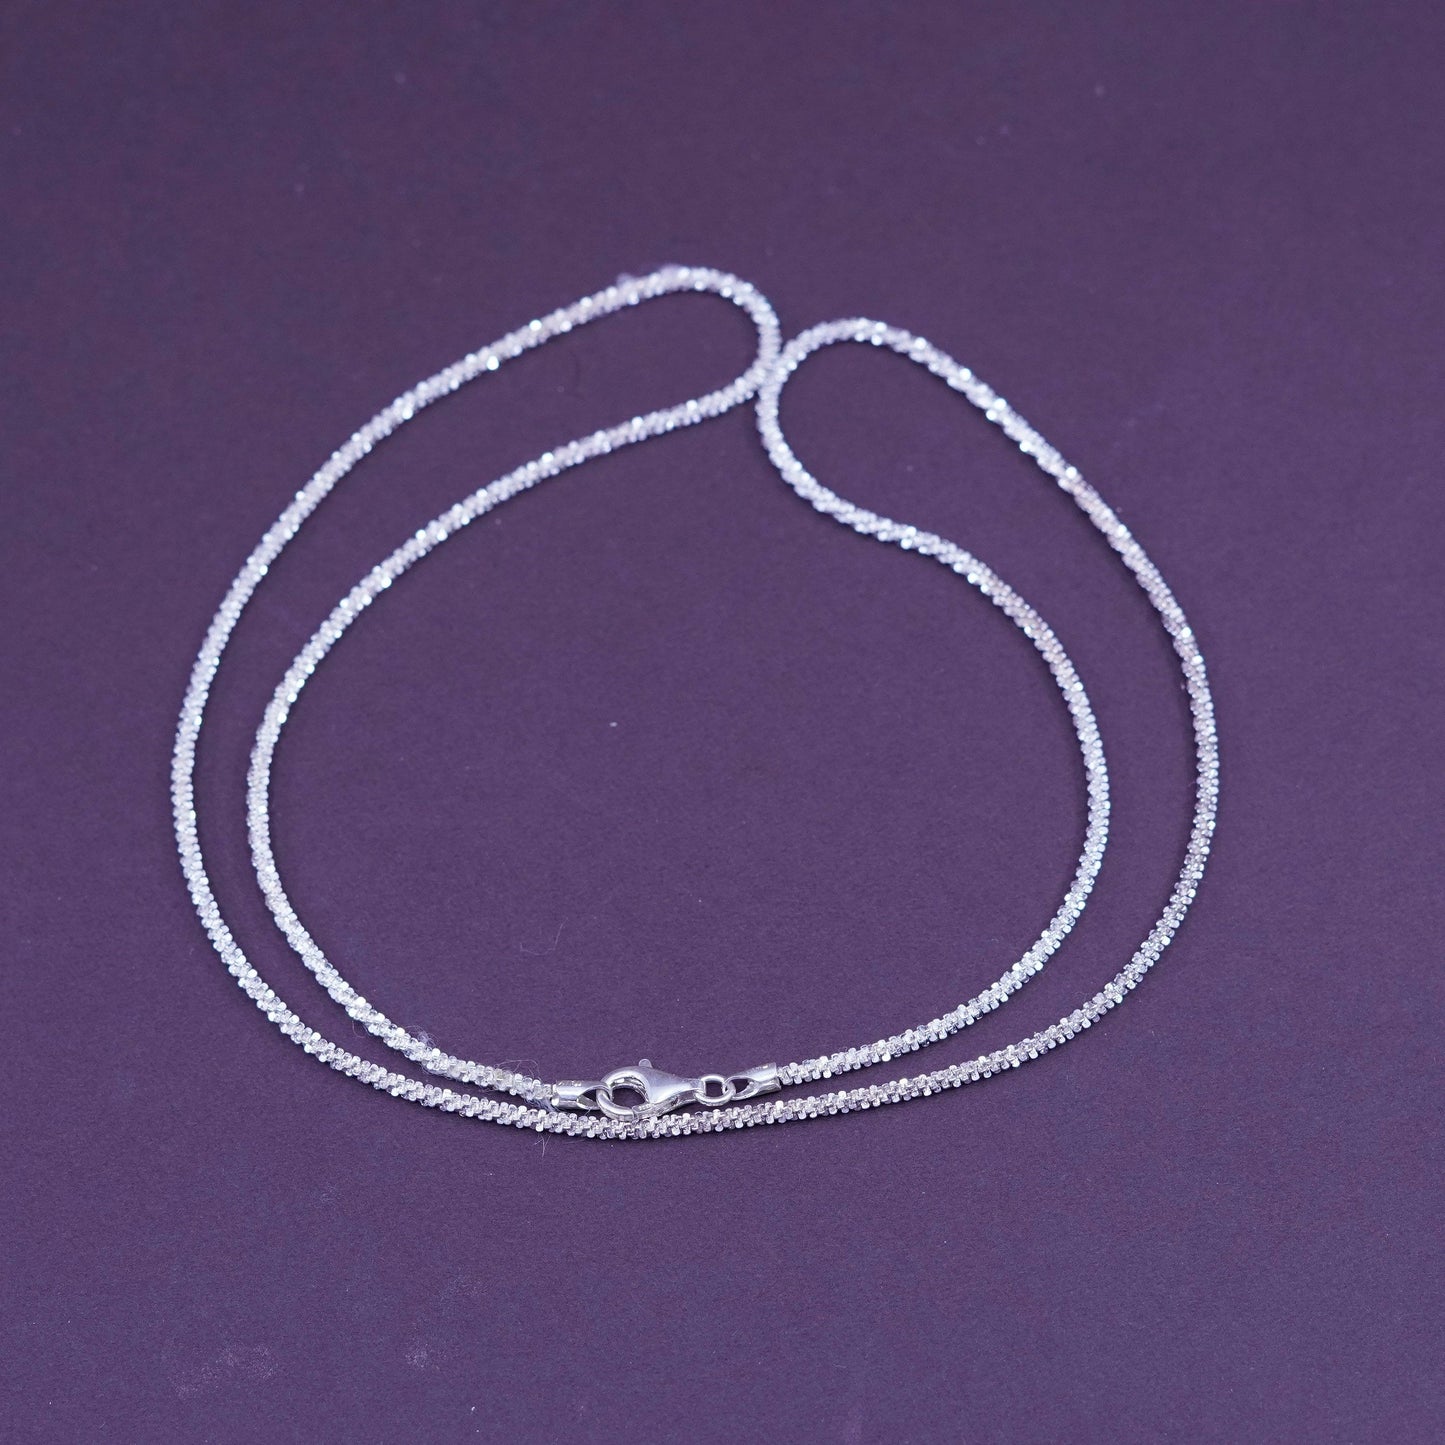 24”, 2mm, vintage Sterling silver necklace, Italy 925 twisted chain